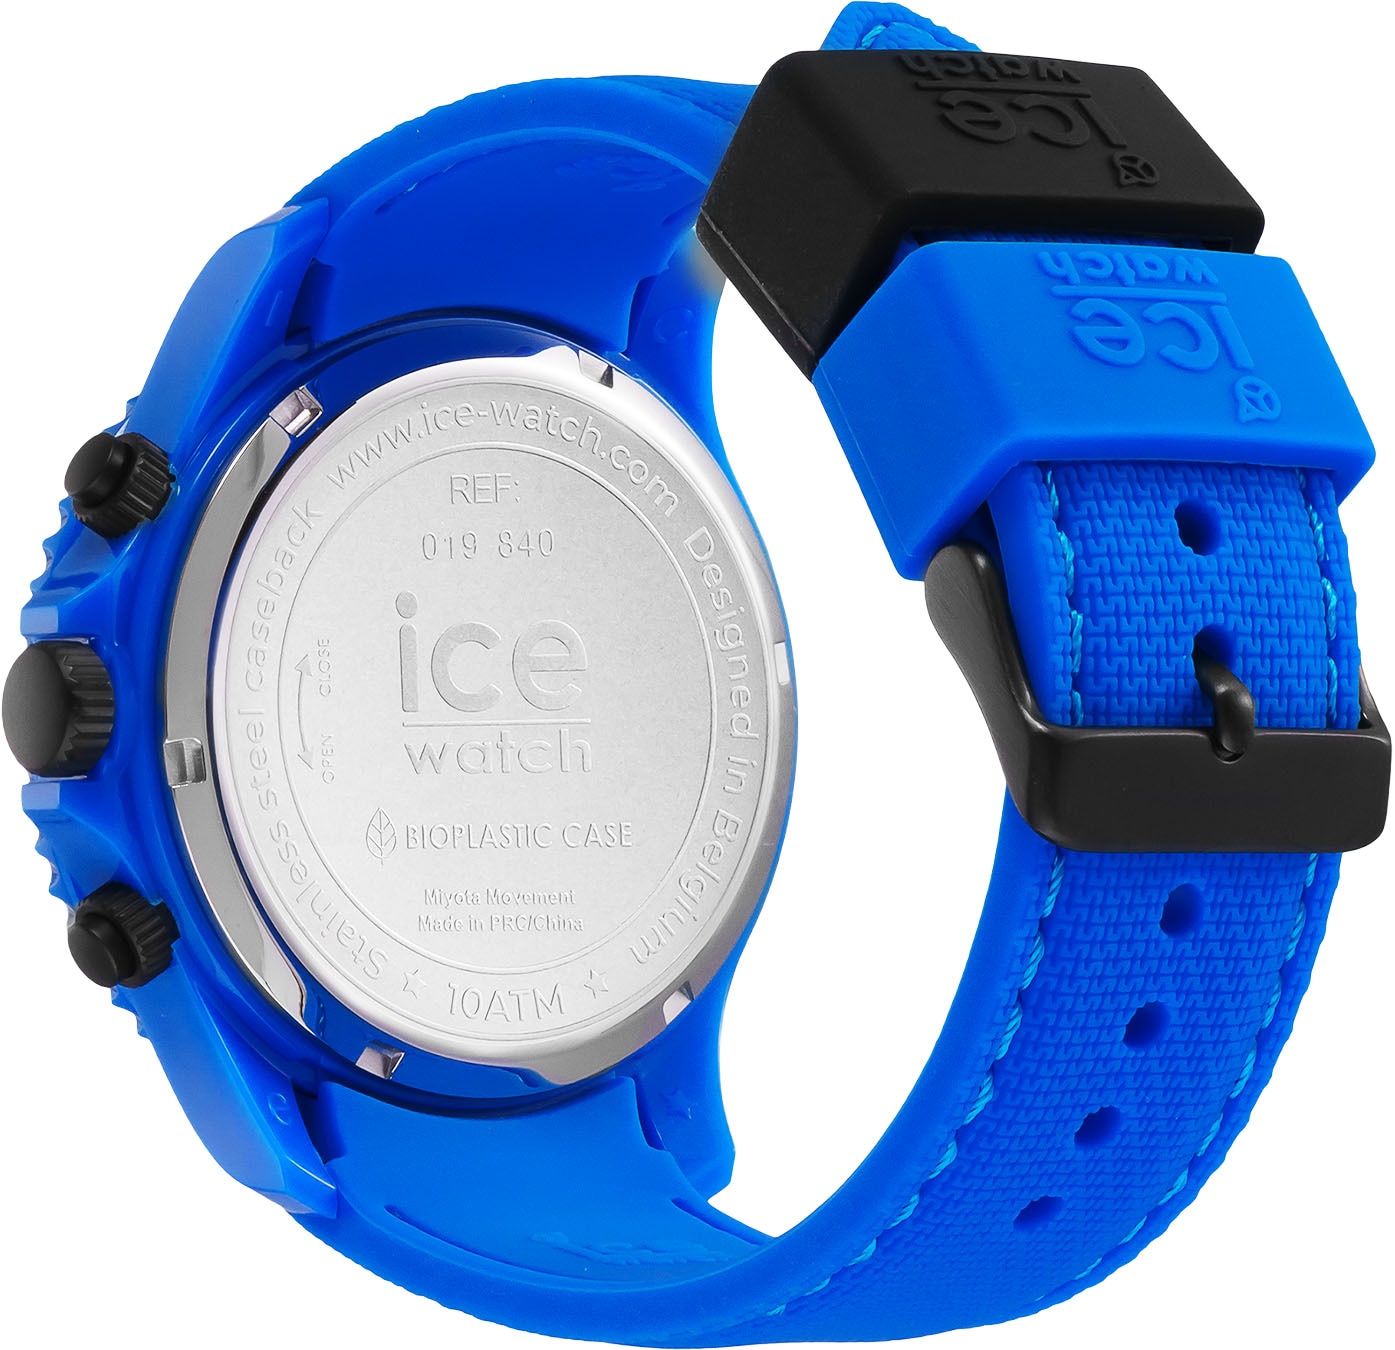 Chronograph CH, shoppen - bei OTTO Neon blue chrono 019840« - ice-watch »ICE online Large -